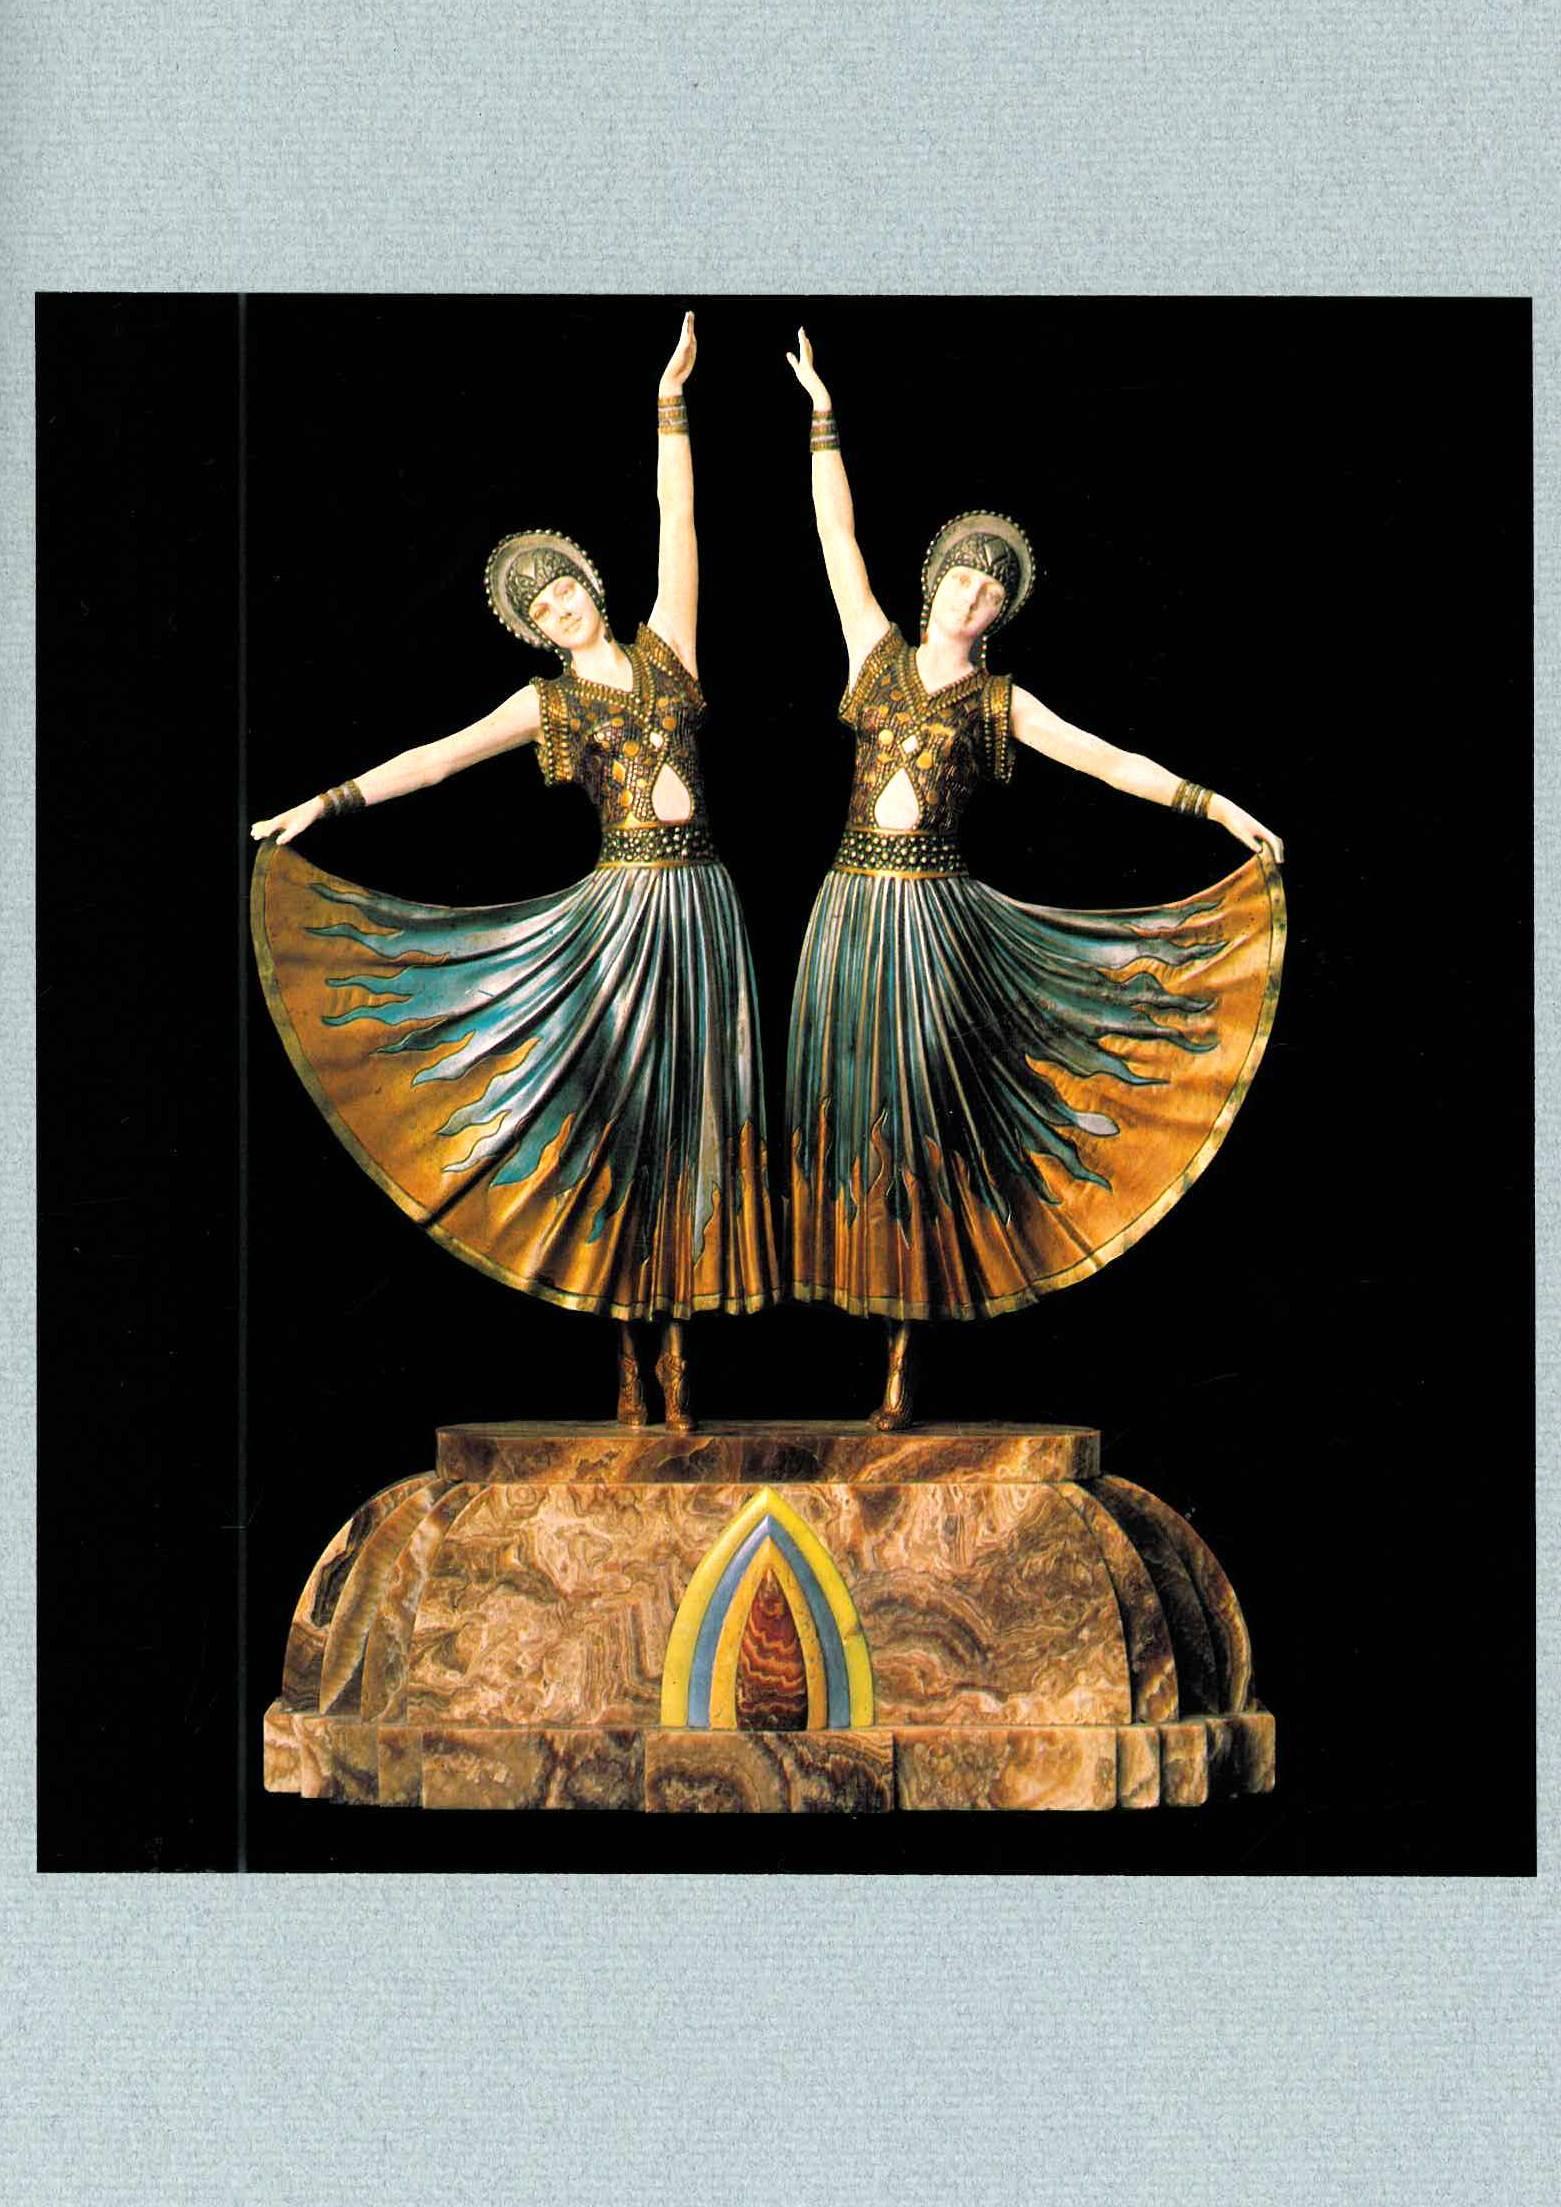 Paper Isadora Duncan with Art Deco Sculptures by Chiparus, Preiss and Others (Book) For Sale